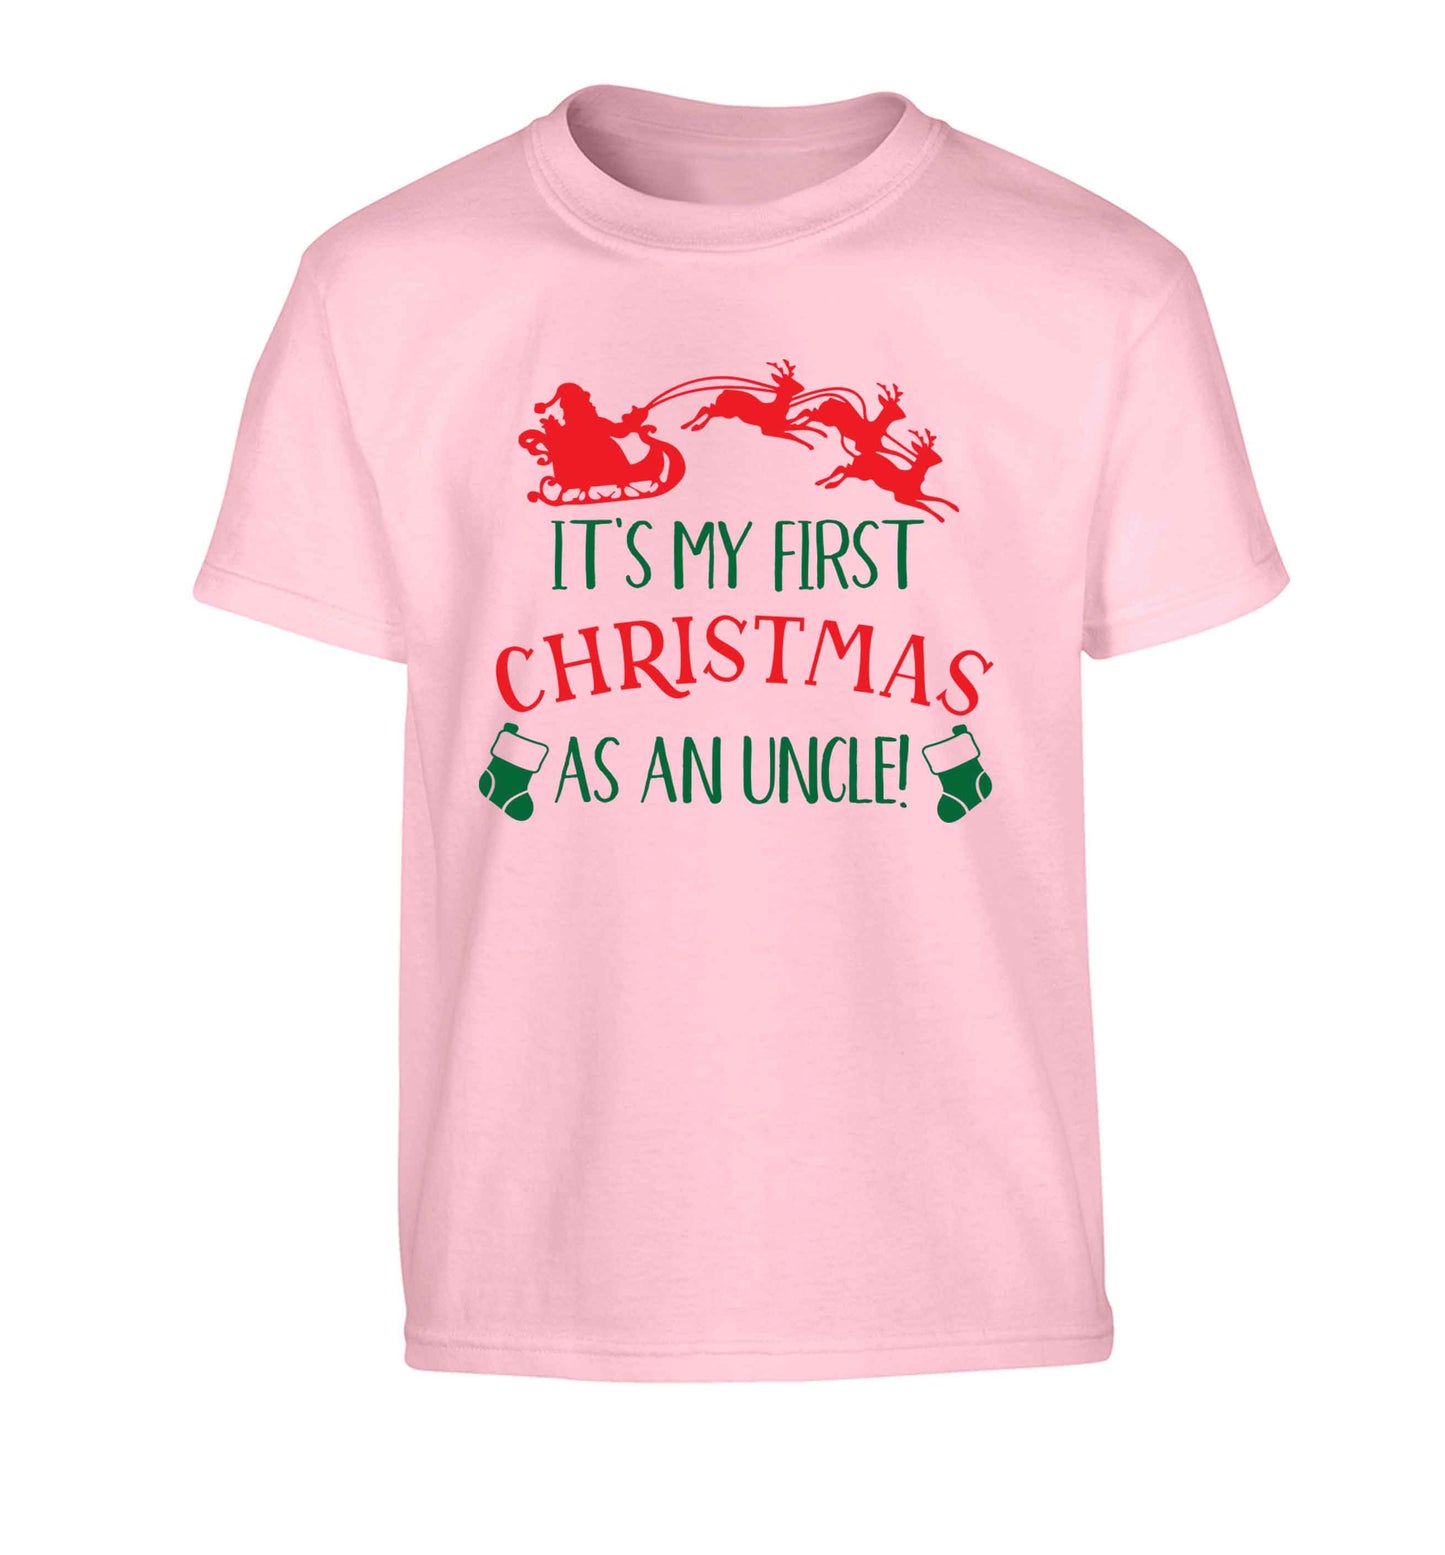 It's my first Christmas as an uncle! Children's light pink Tshirt 12-13 Years